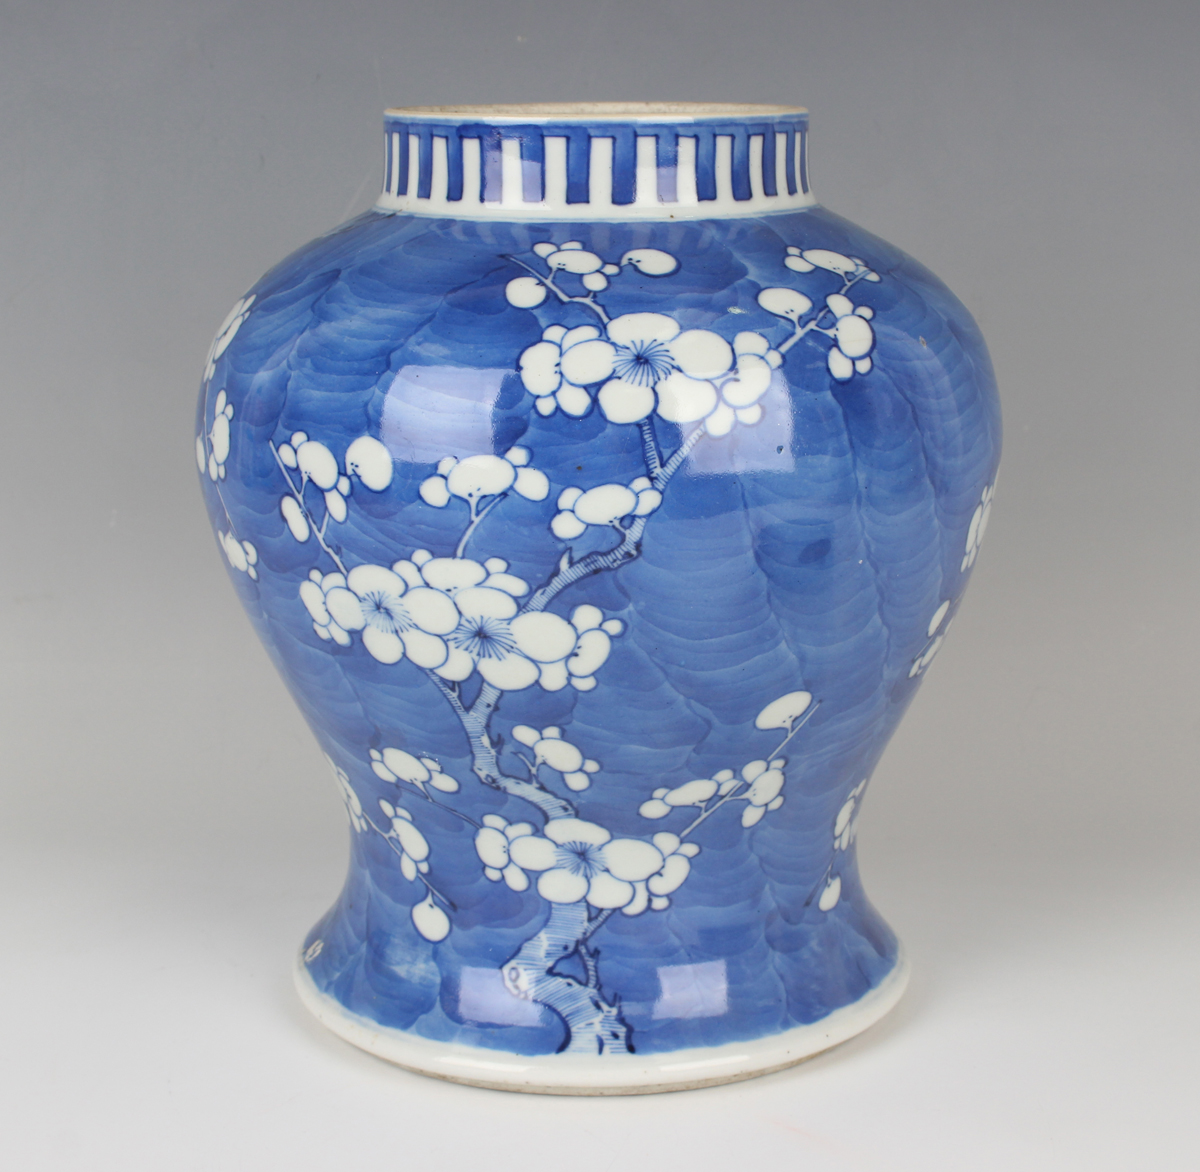 A Chinese blue and white porcelain jar, late Qing dynasty, of baluster form, painted with branches - Image 9 of 9